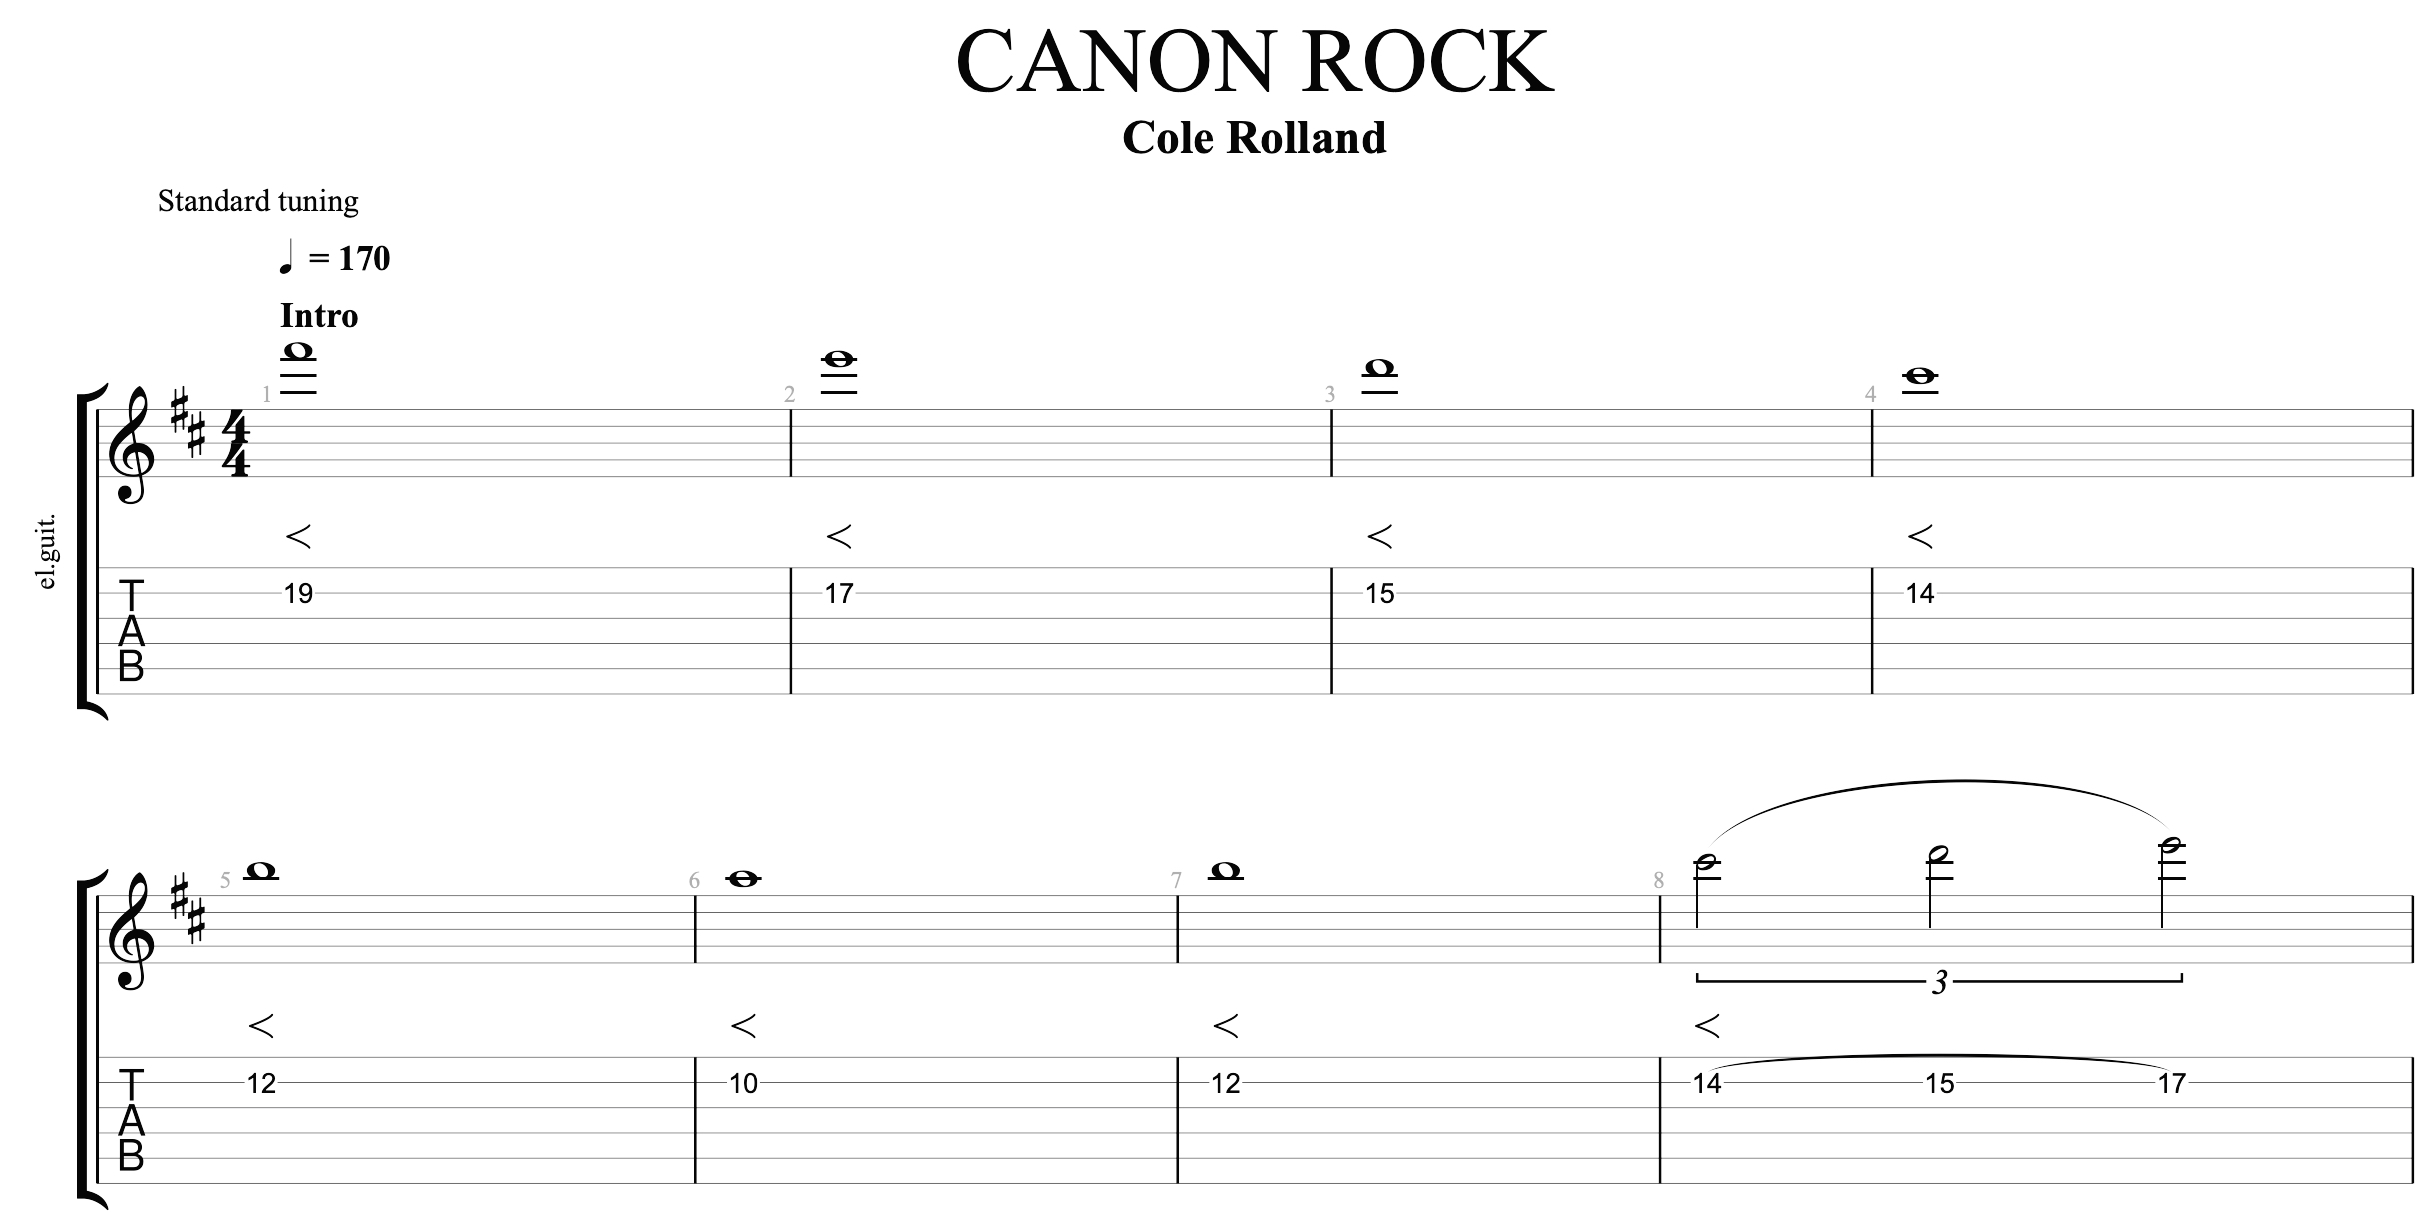 Free Tab Learn Canon Rock On Electric Guitar Feat Cole Rolland Guitar Pro Blog Arobas Music